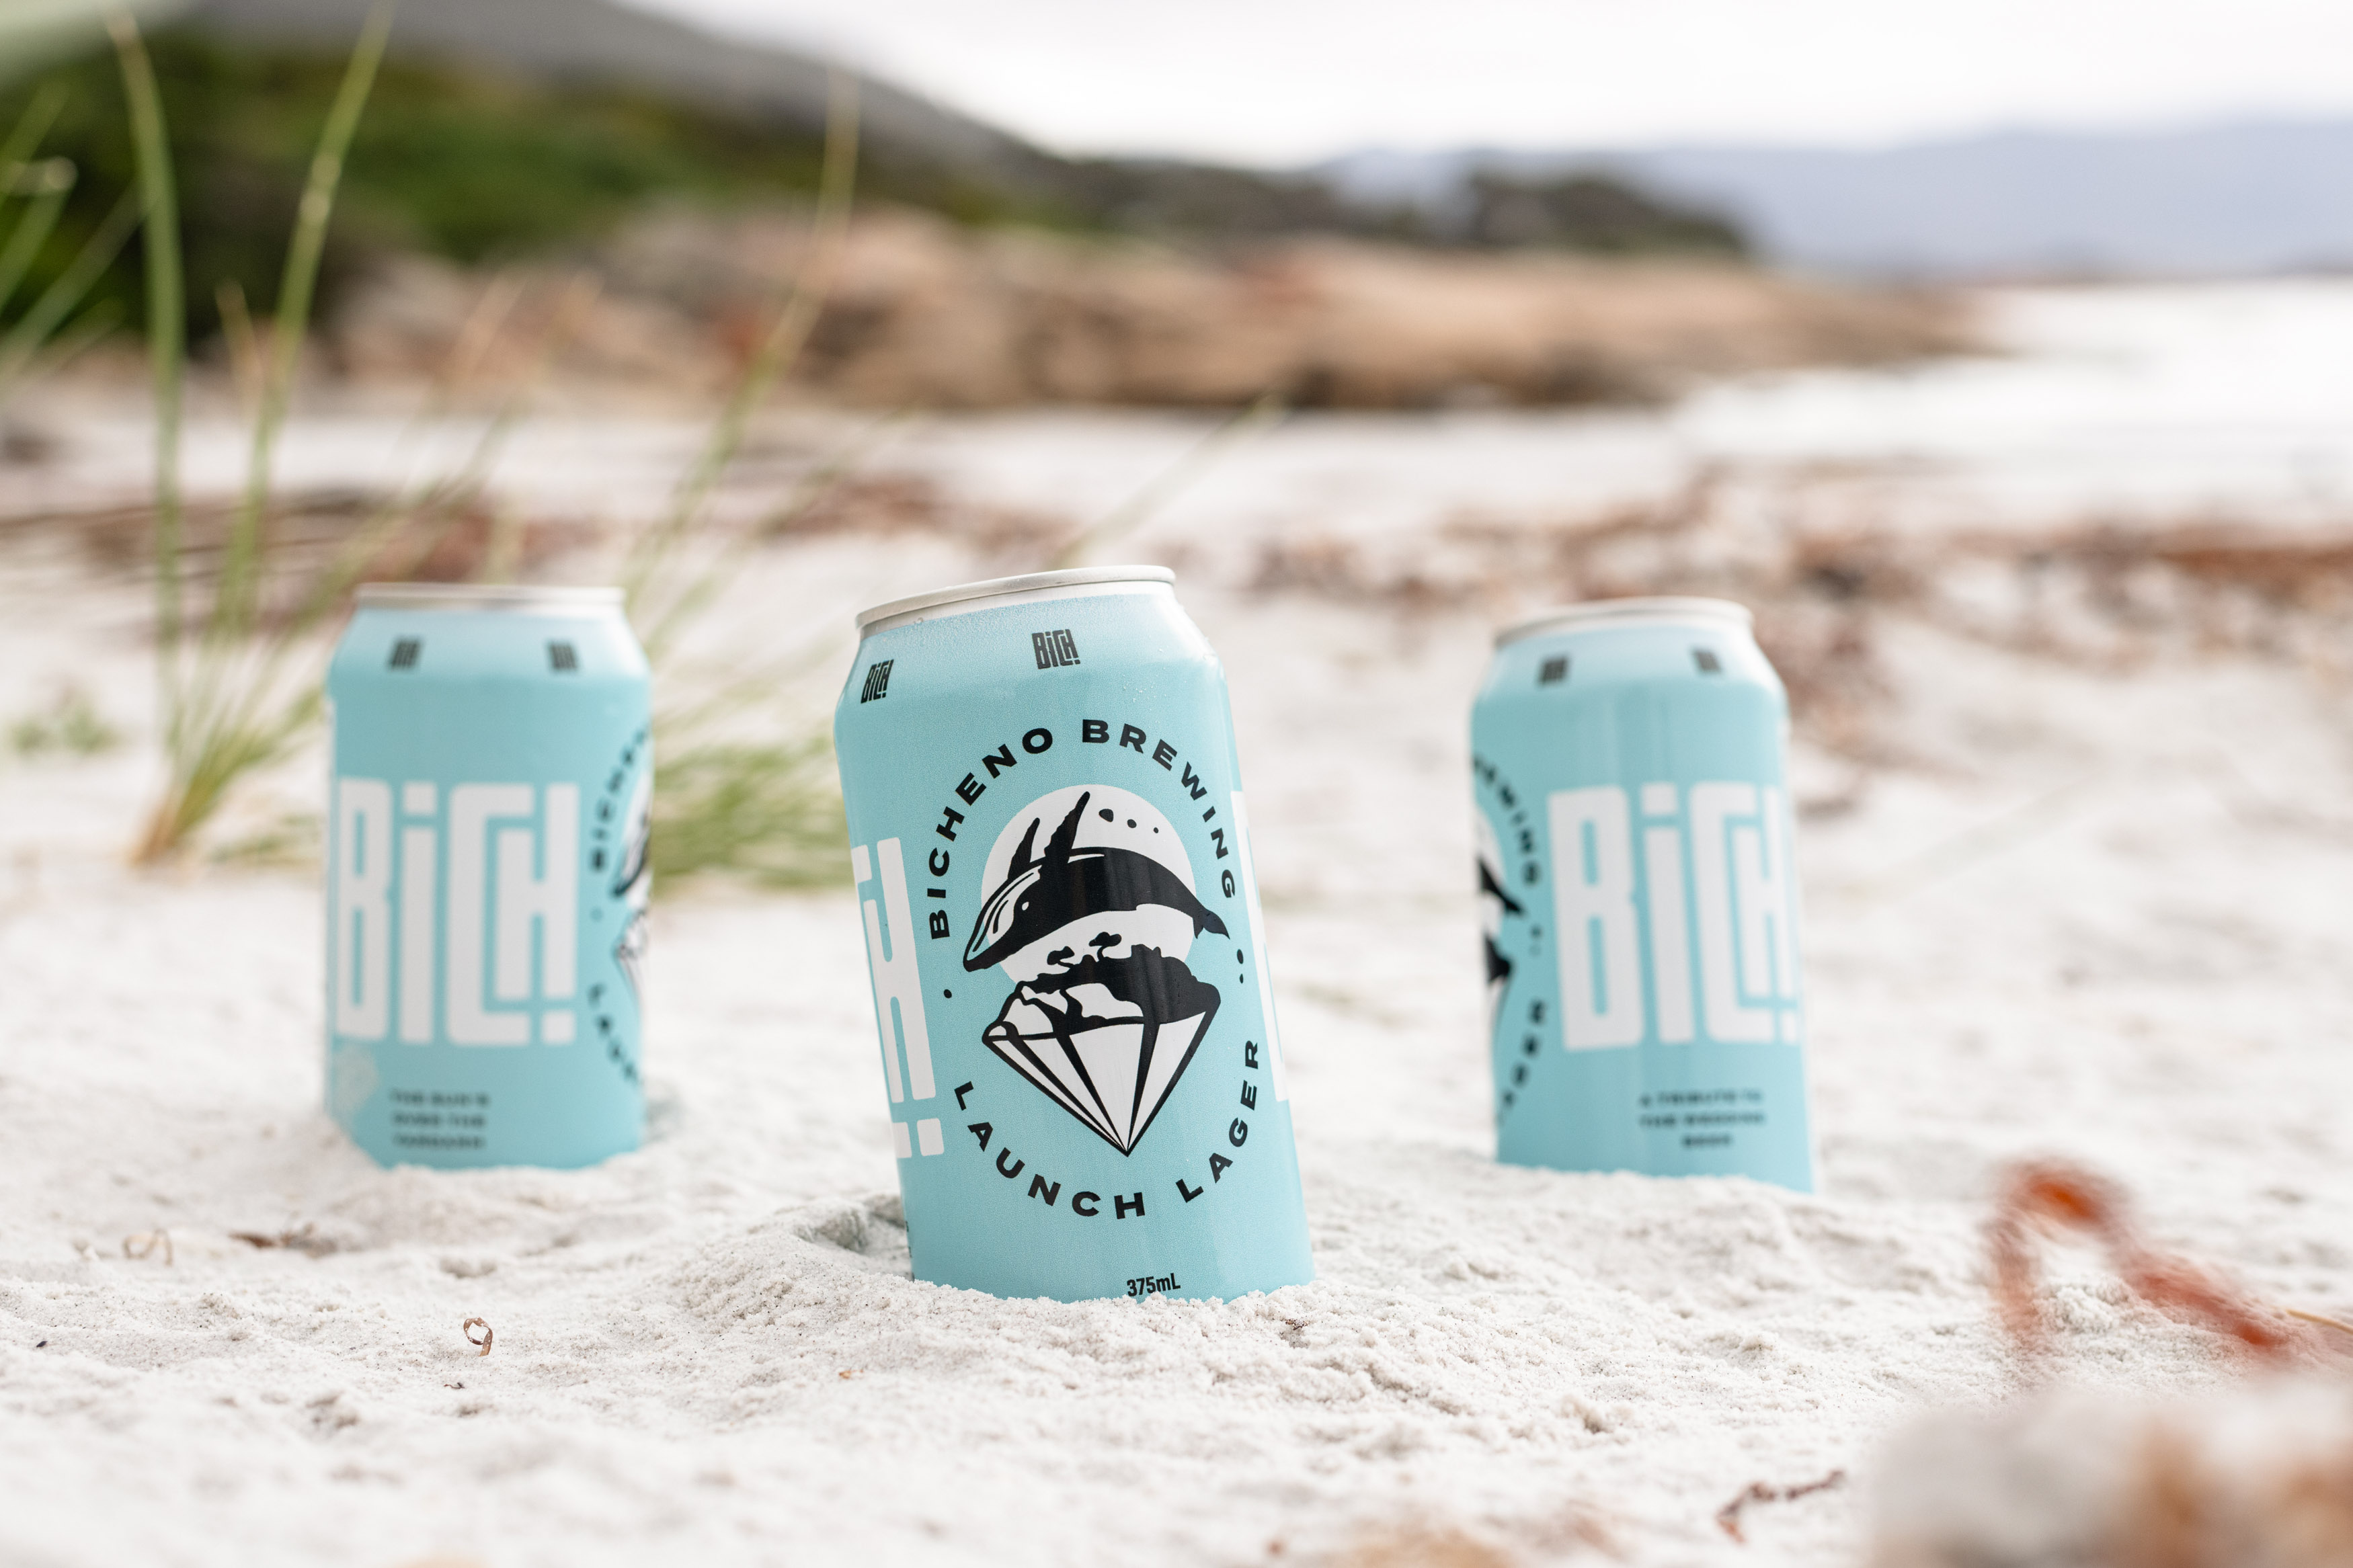 Three Blue Bicheno Brewing cans sitting in the sand.